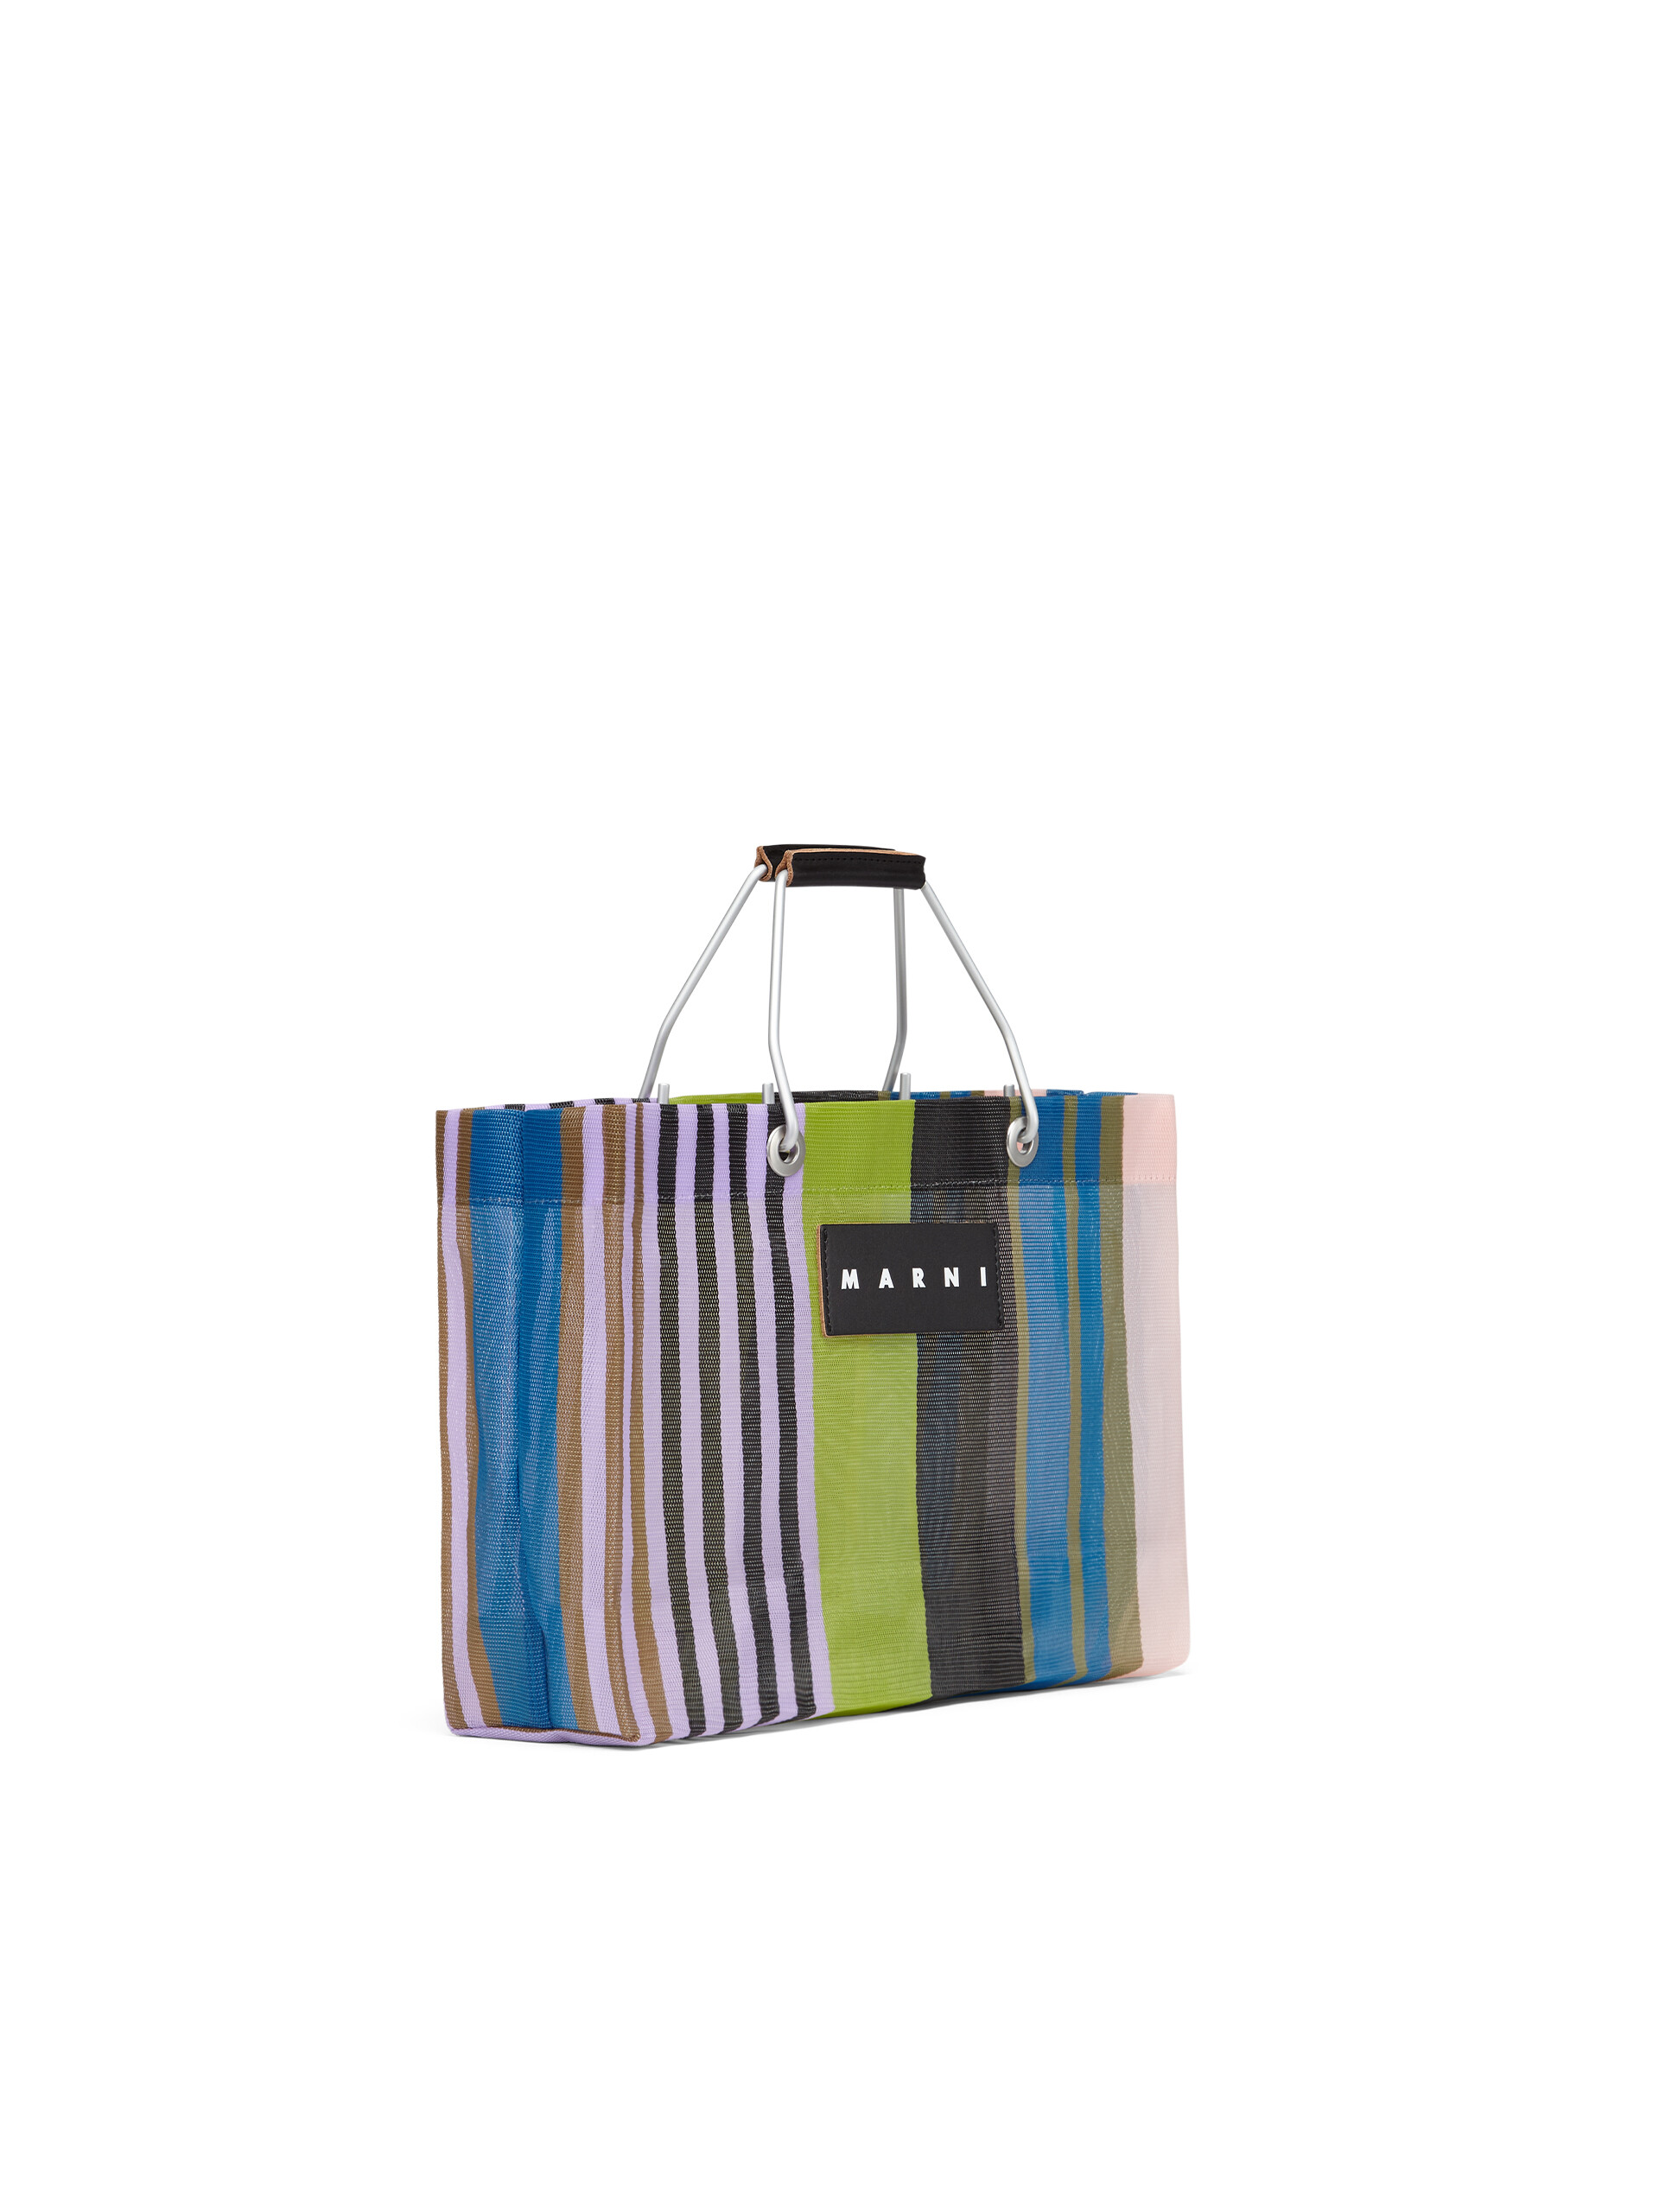 MARNI MARKET shopping bag in striped lilac, green, black, beige and blue polyamide - Bags - Image 2